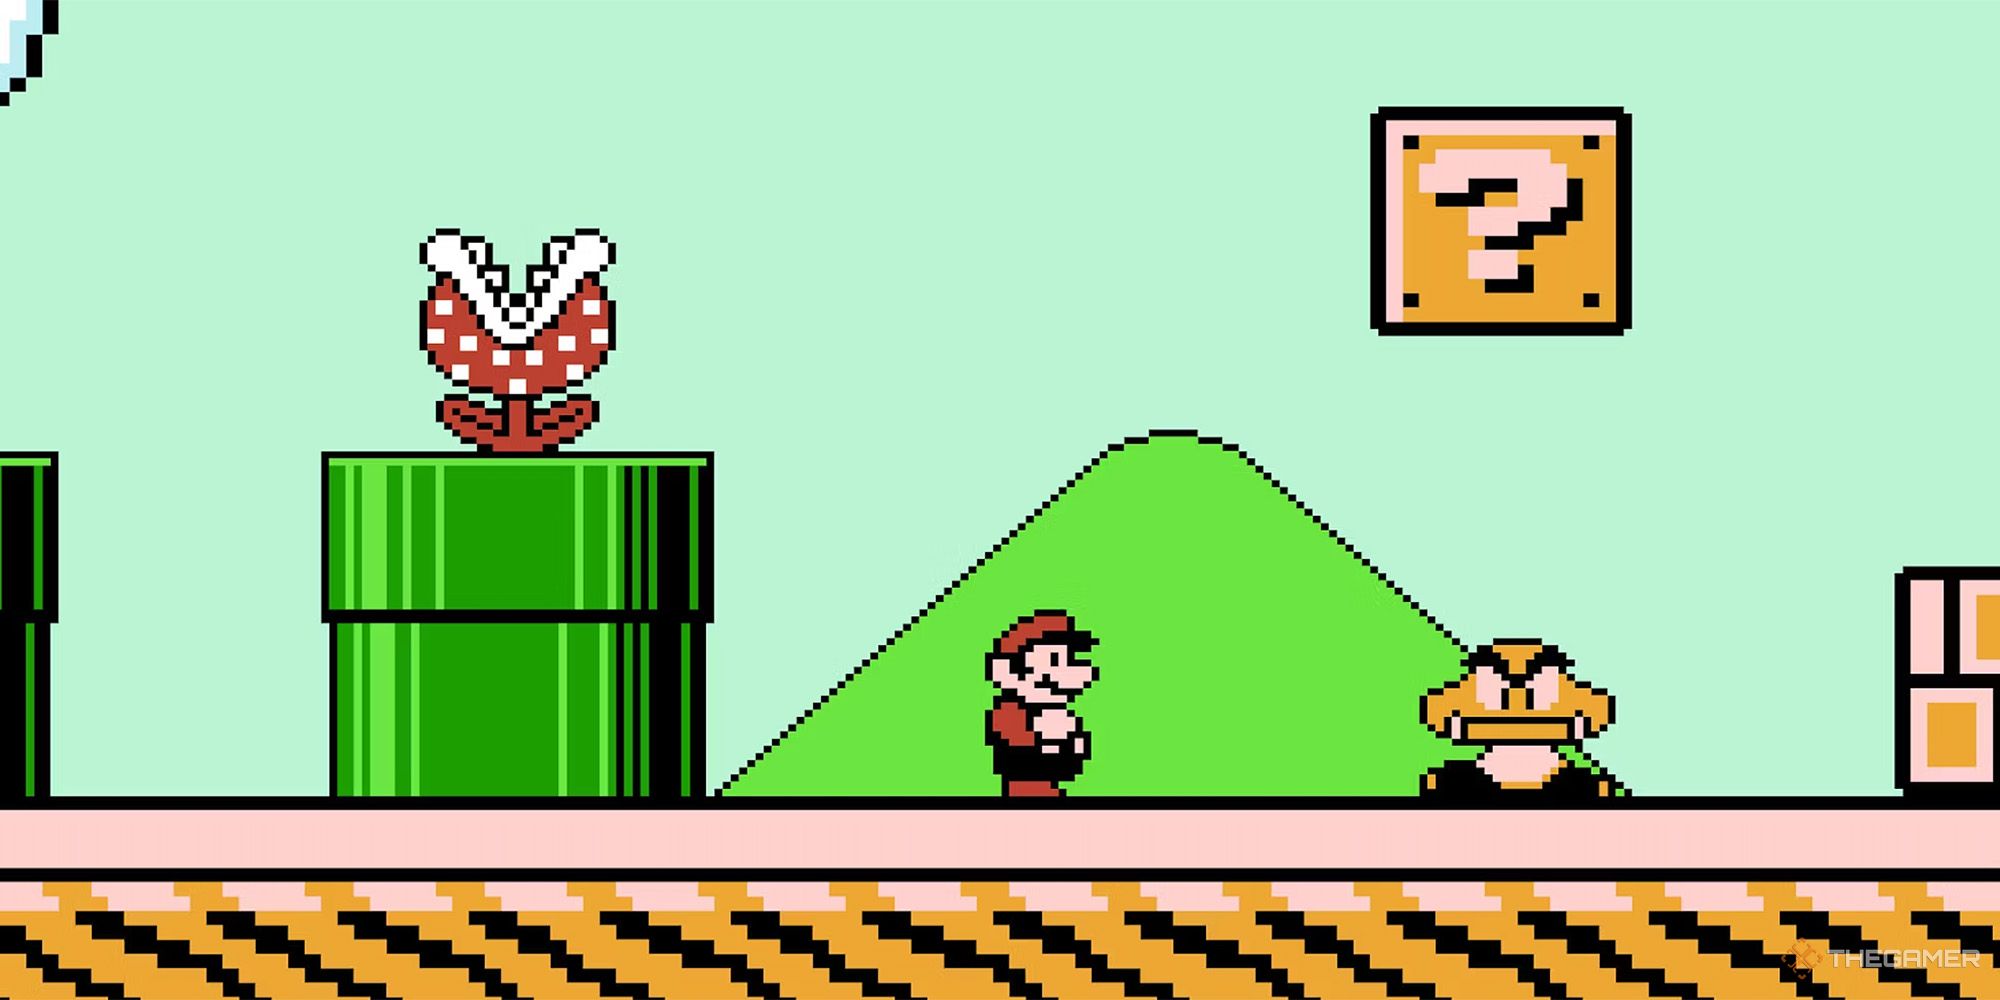 Super Mario Bros 3 - Mario standing next to a giant Goomba and Piranha Plant in Giant Land